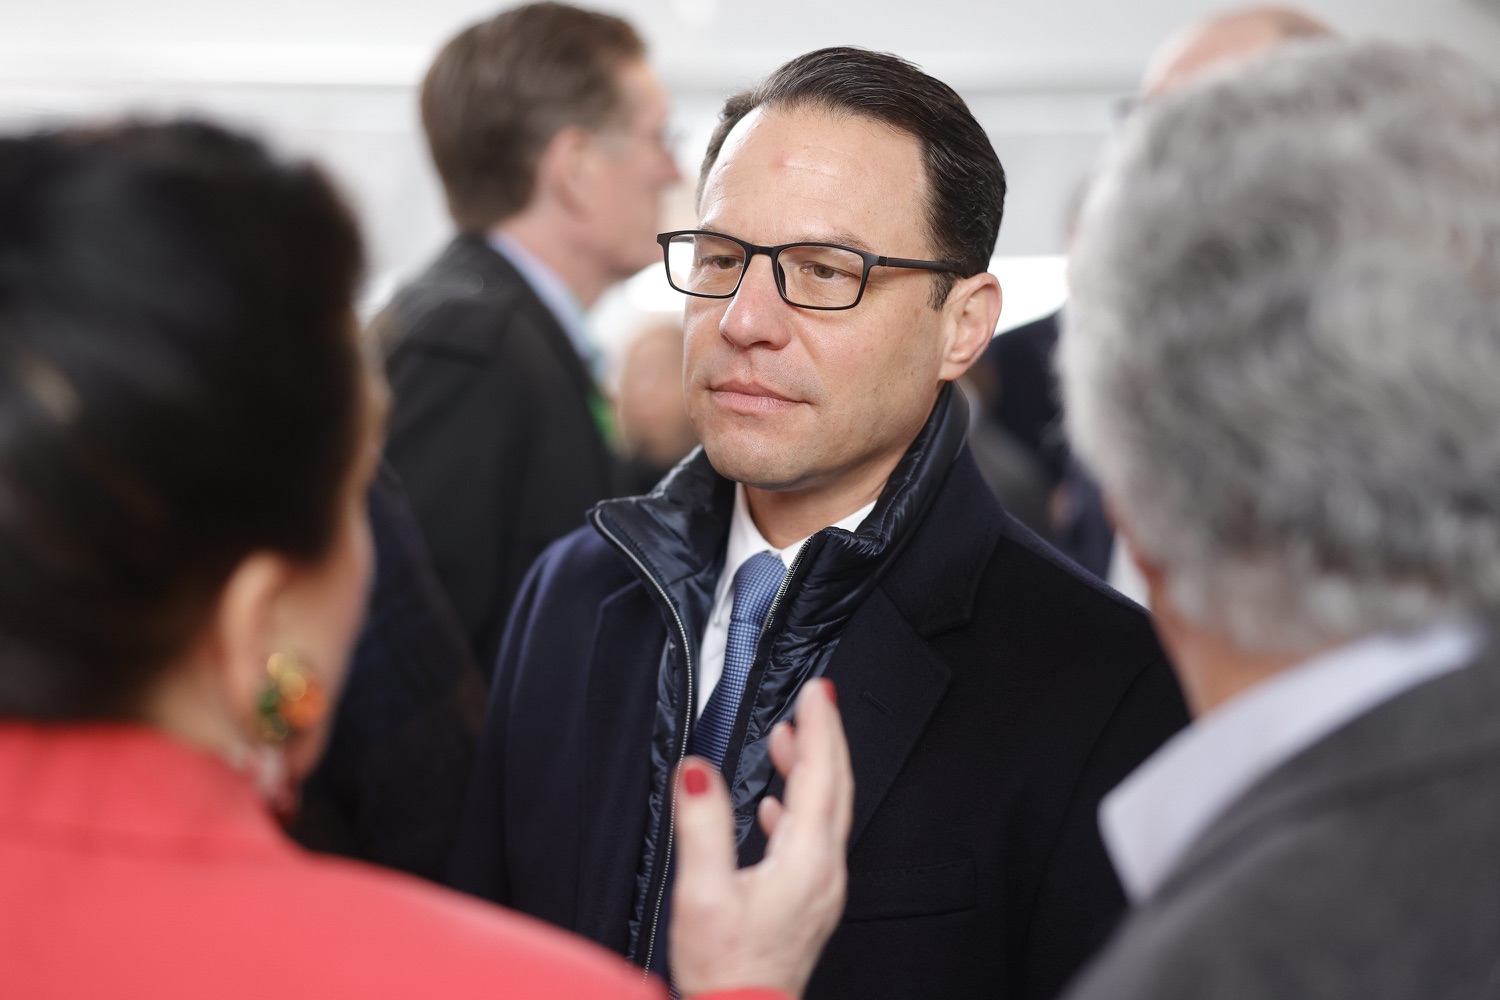 Pennsylvania Governor Josh Shapiro speaks with attendees.  Pennsylvania Governor Josh Shapiro participates in a groundbreaking for Spark Therapeutics at the future site of their new building, at 30th and Chestnut streets.  FEBRUARY 28, 2023 - PHILADELPHIA, PA<br><a href="https://filesource.amperwave.net/commonwealthofpa/photo/22728_gov_spark_dz_0010.JPG" target="_blank">⇣ Download Photo</a>